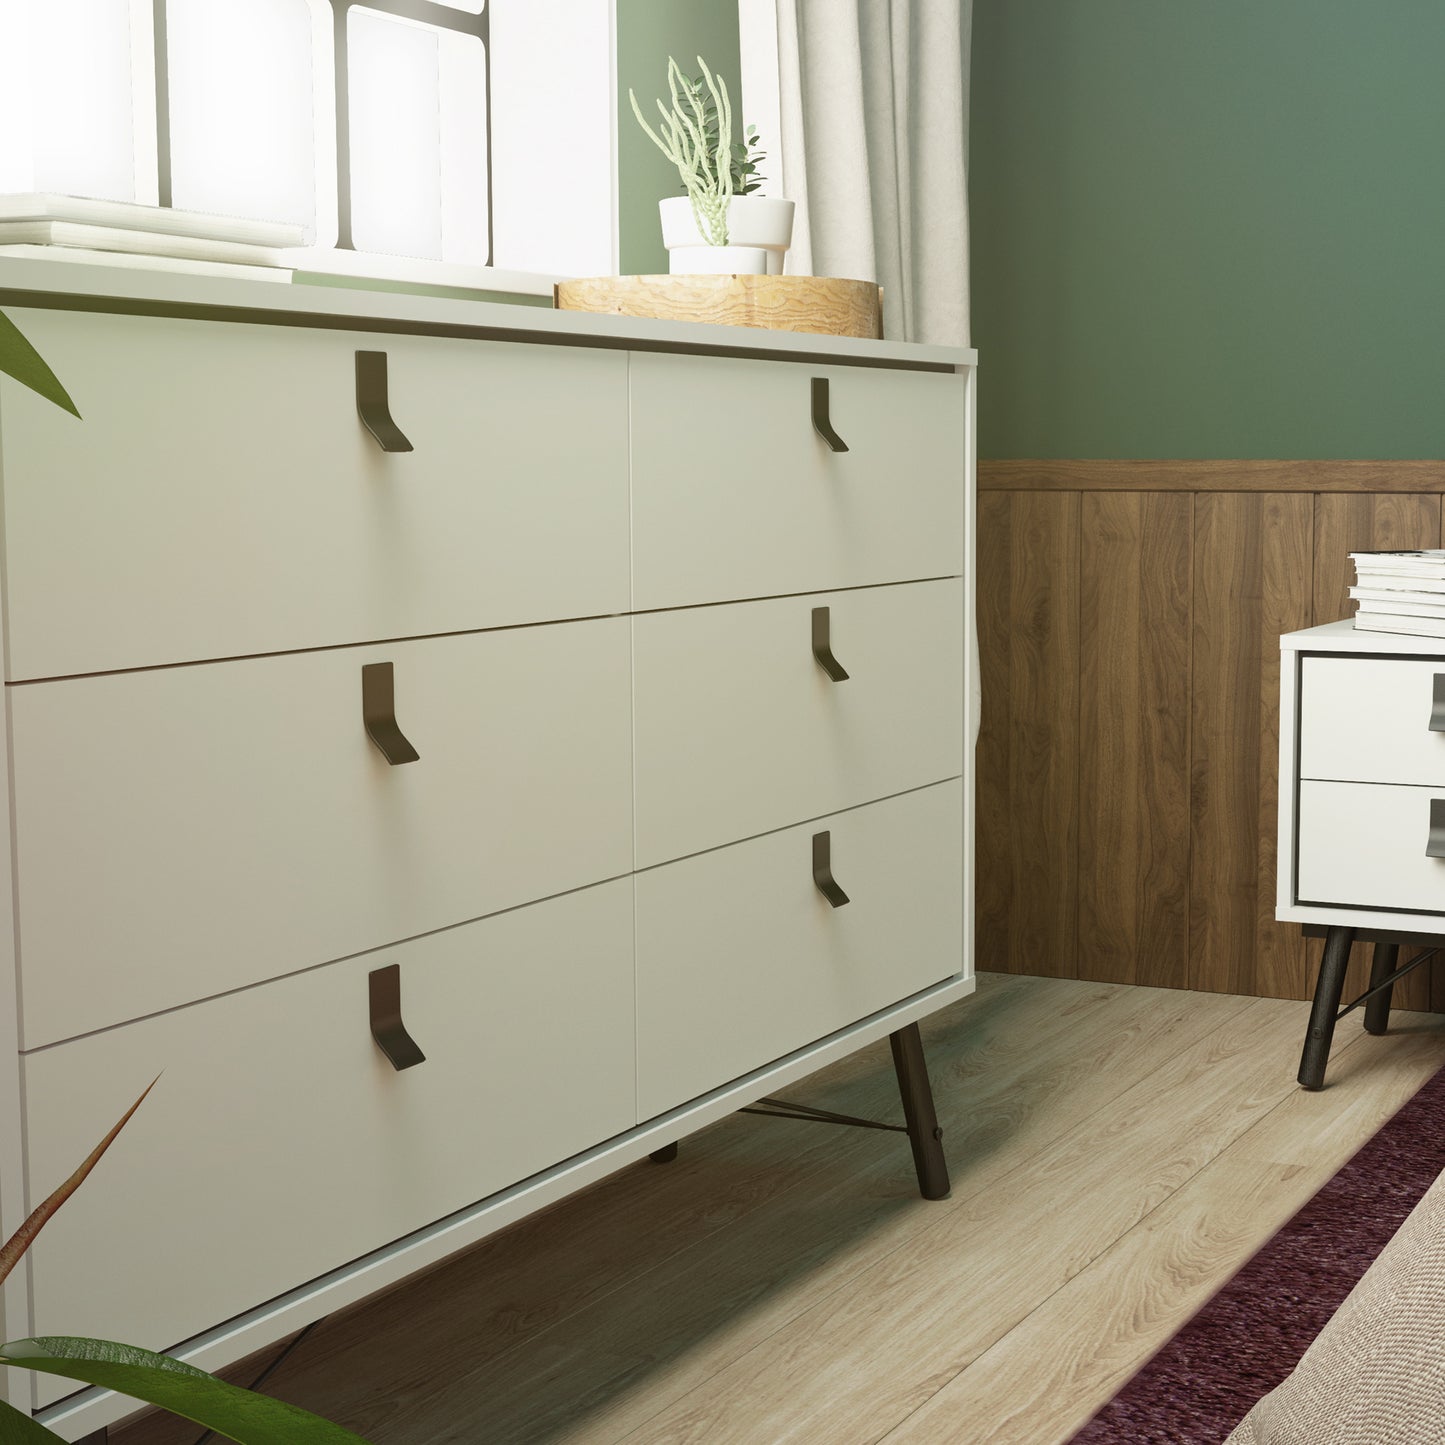 Ry  Wide double chest of drawers 6 drawers in Matt White